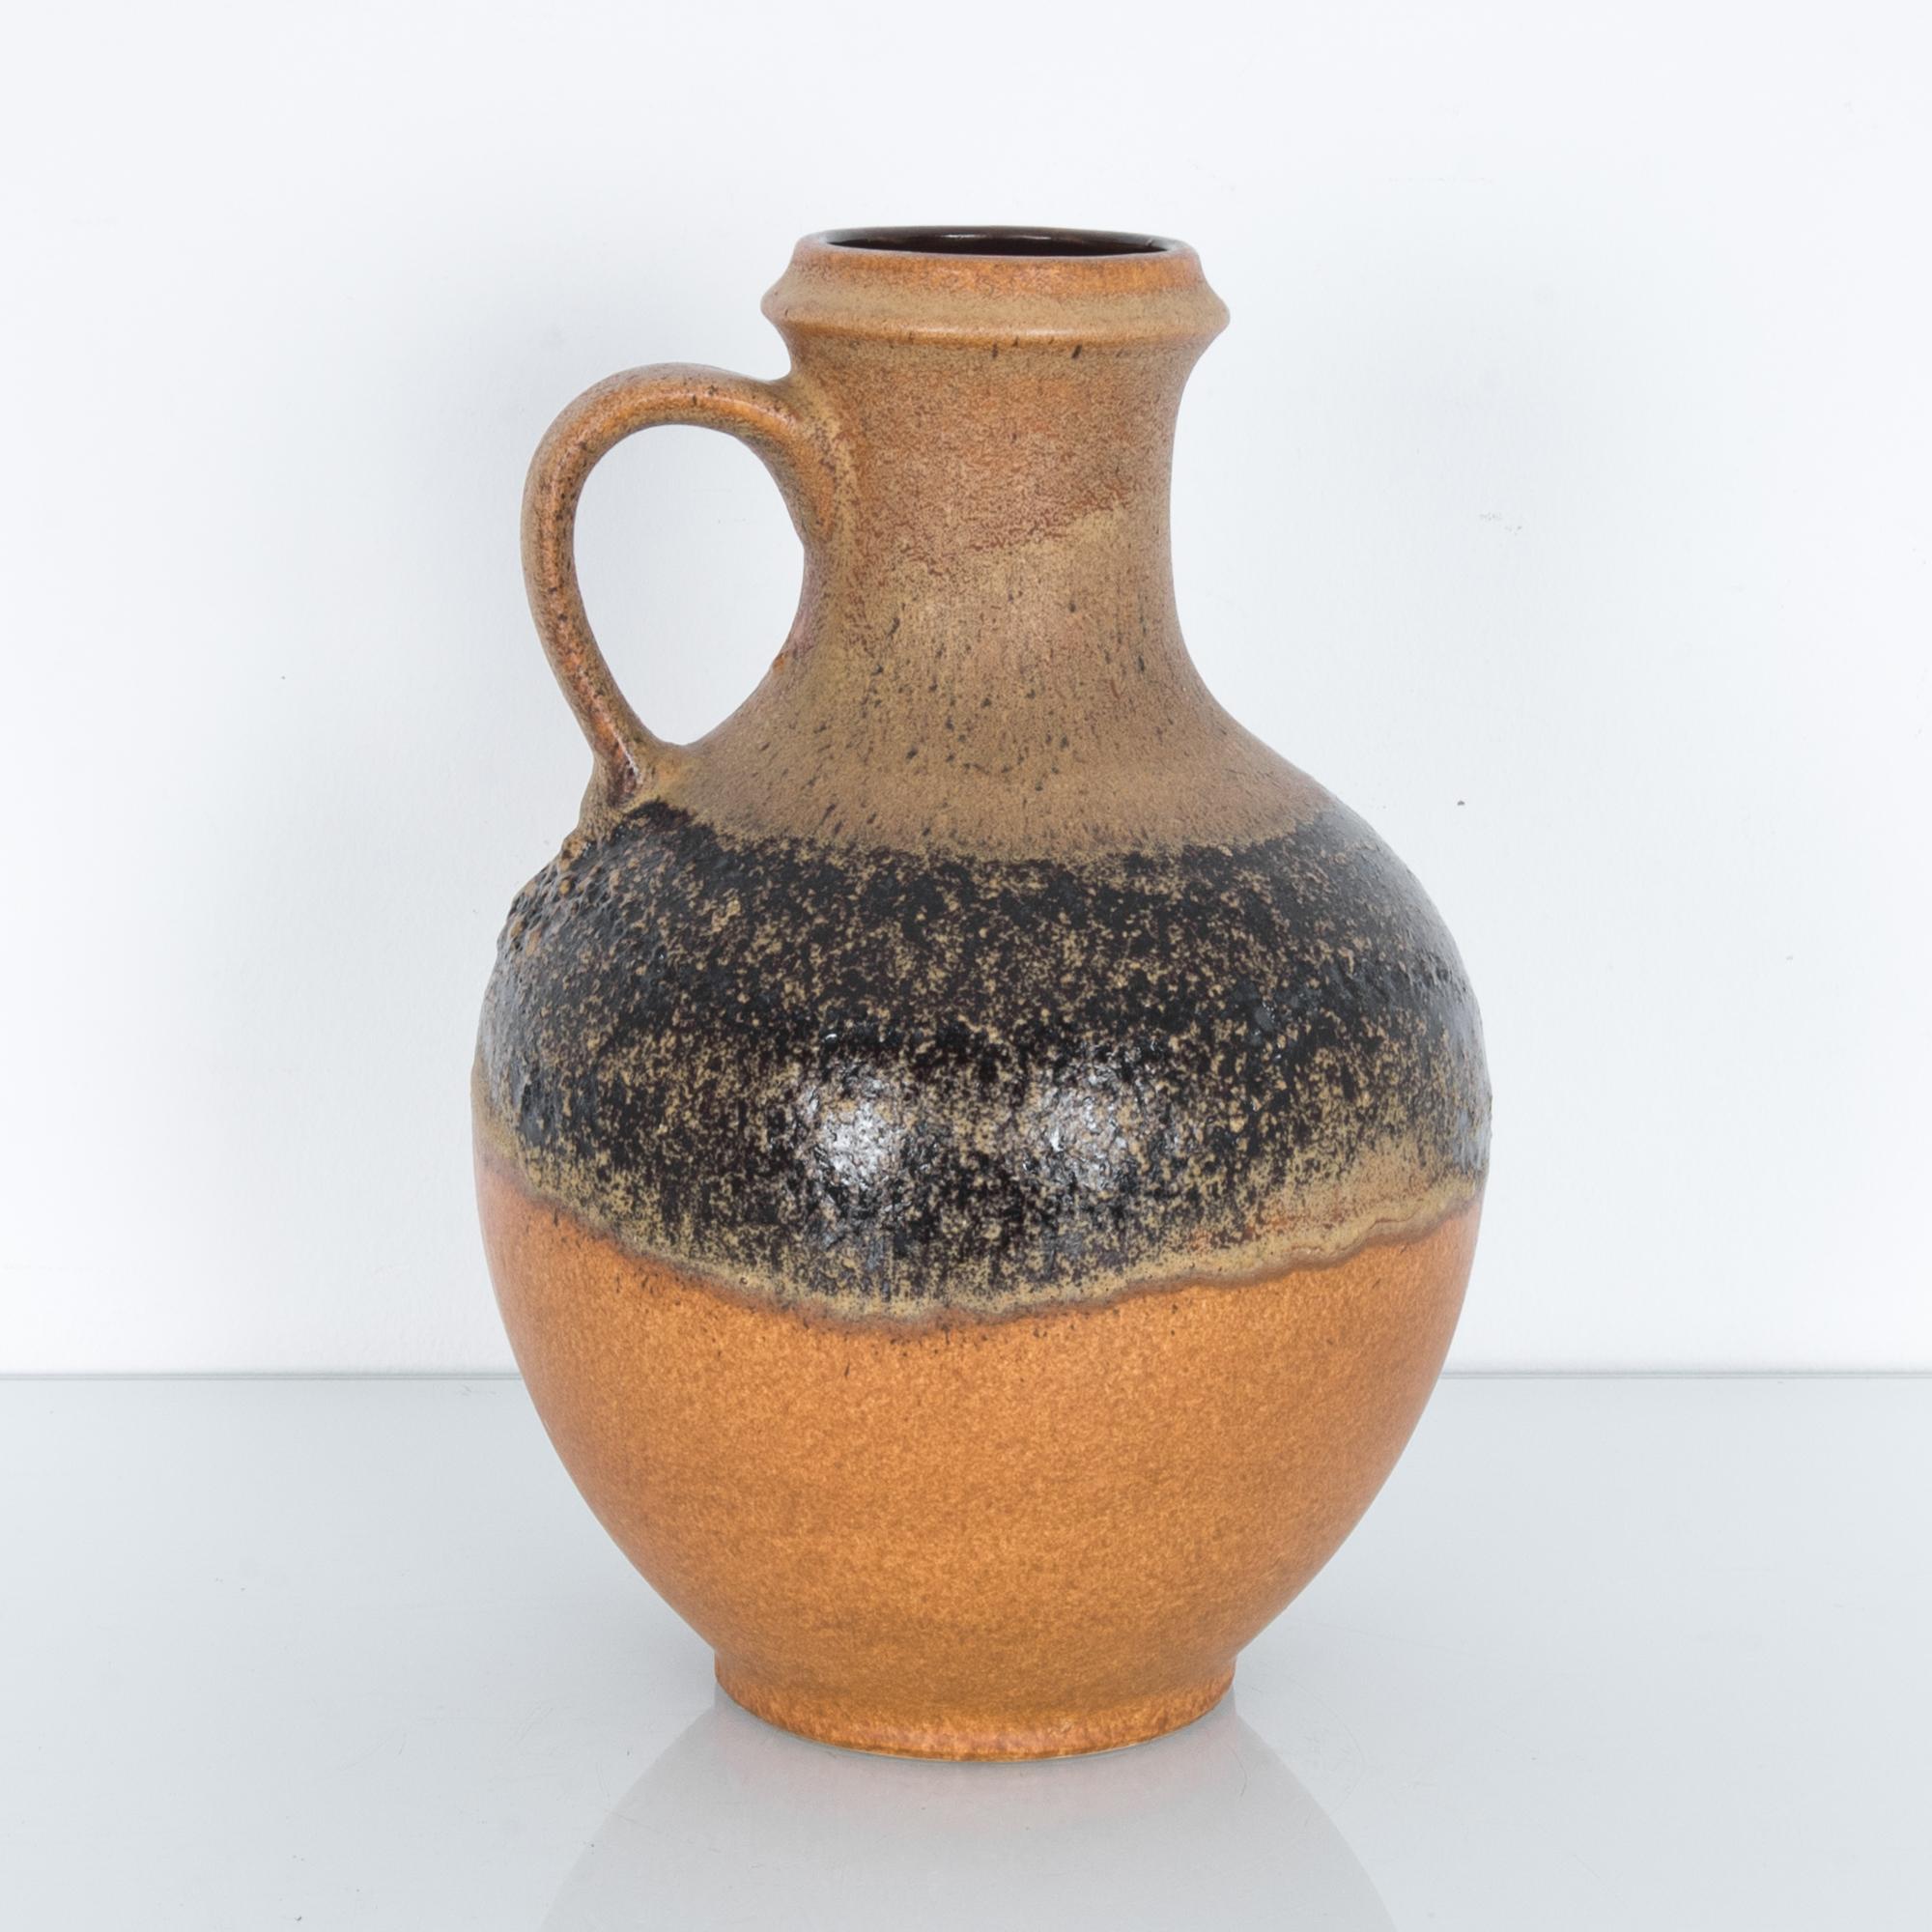 A ceramic vase produced in Germany, circa 1950. Glazed to highlight the natural texture of clay, a bold black stripe crosses a field of mottled orange. These characteristic mid-20th century ceramics were produced in West Germany, by a range of